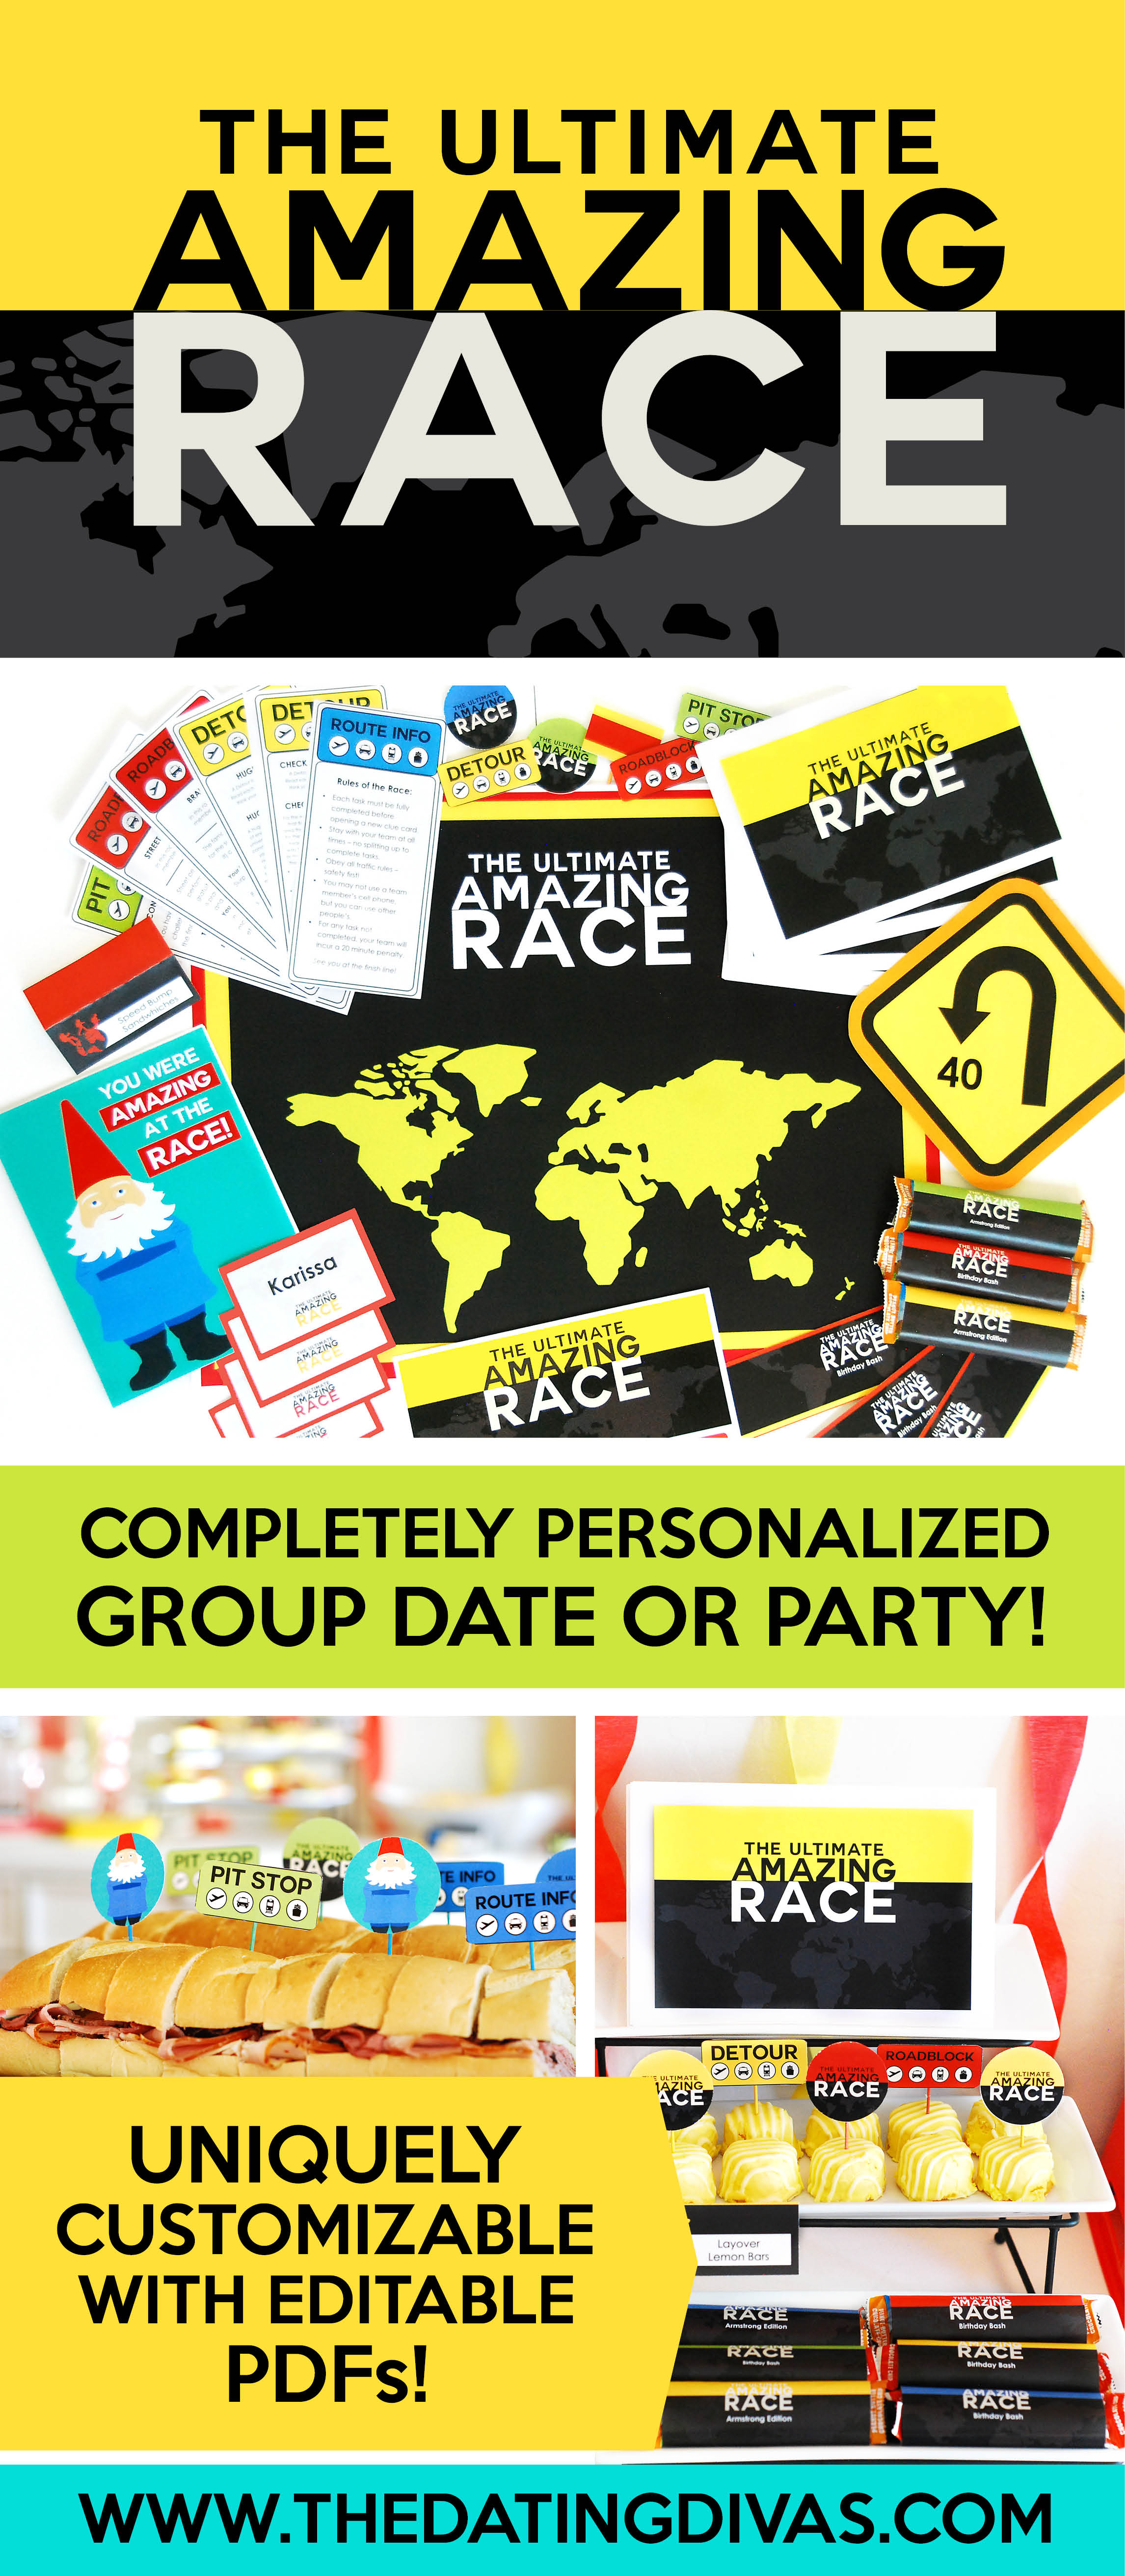 The Amazing Race Game Party